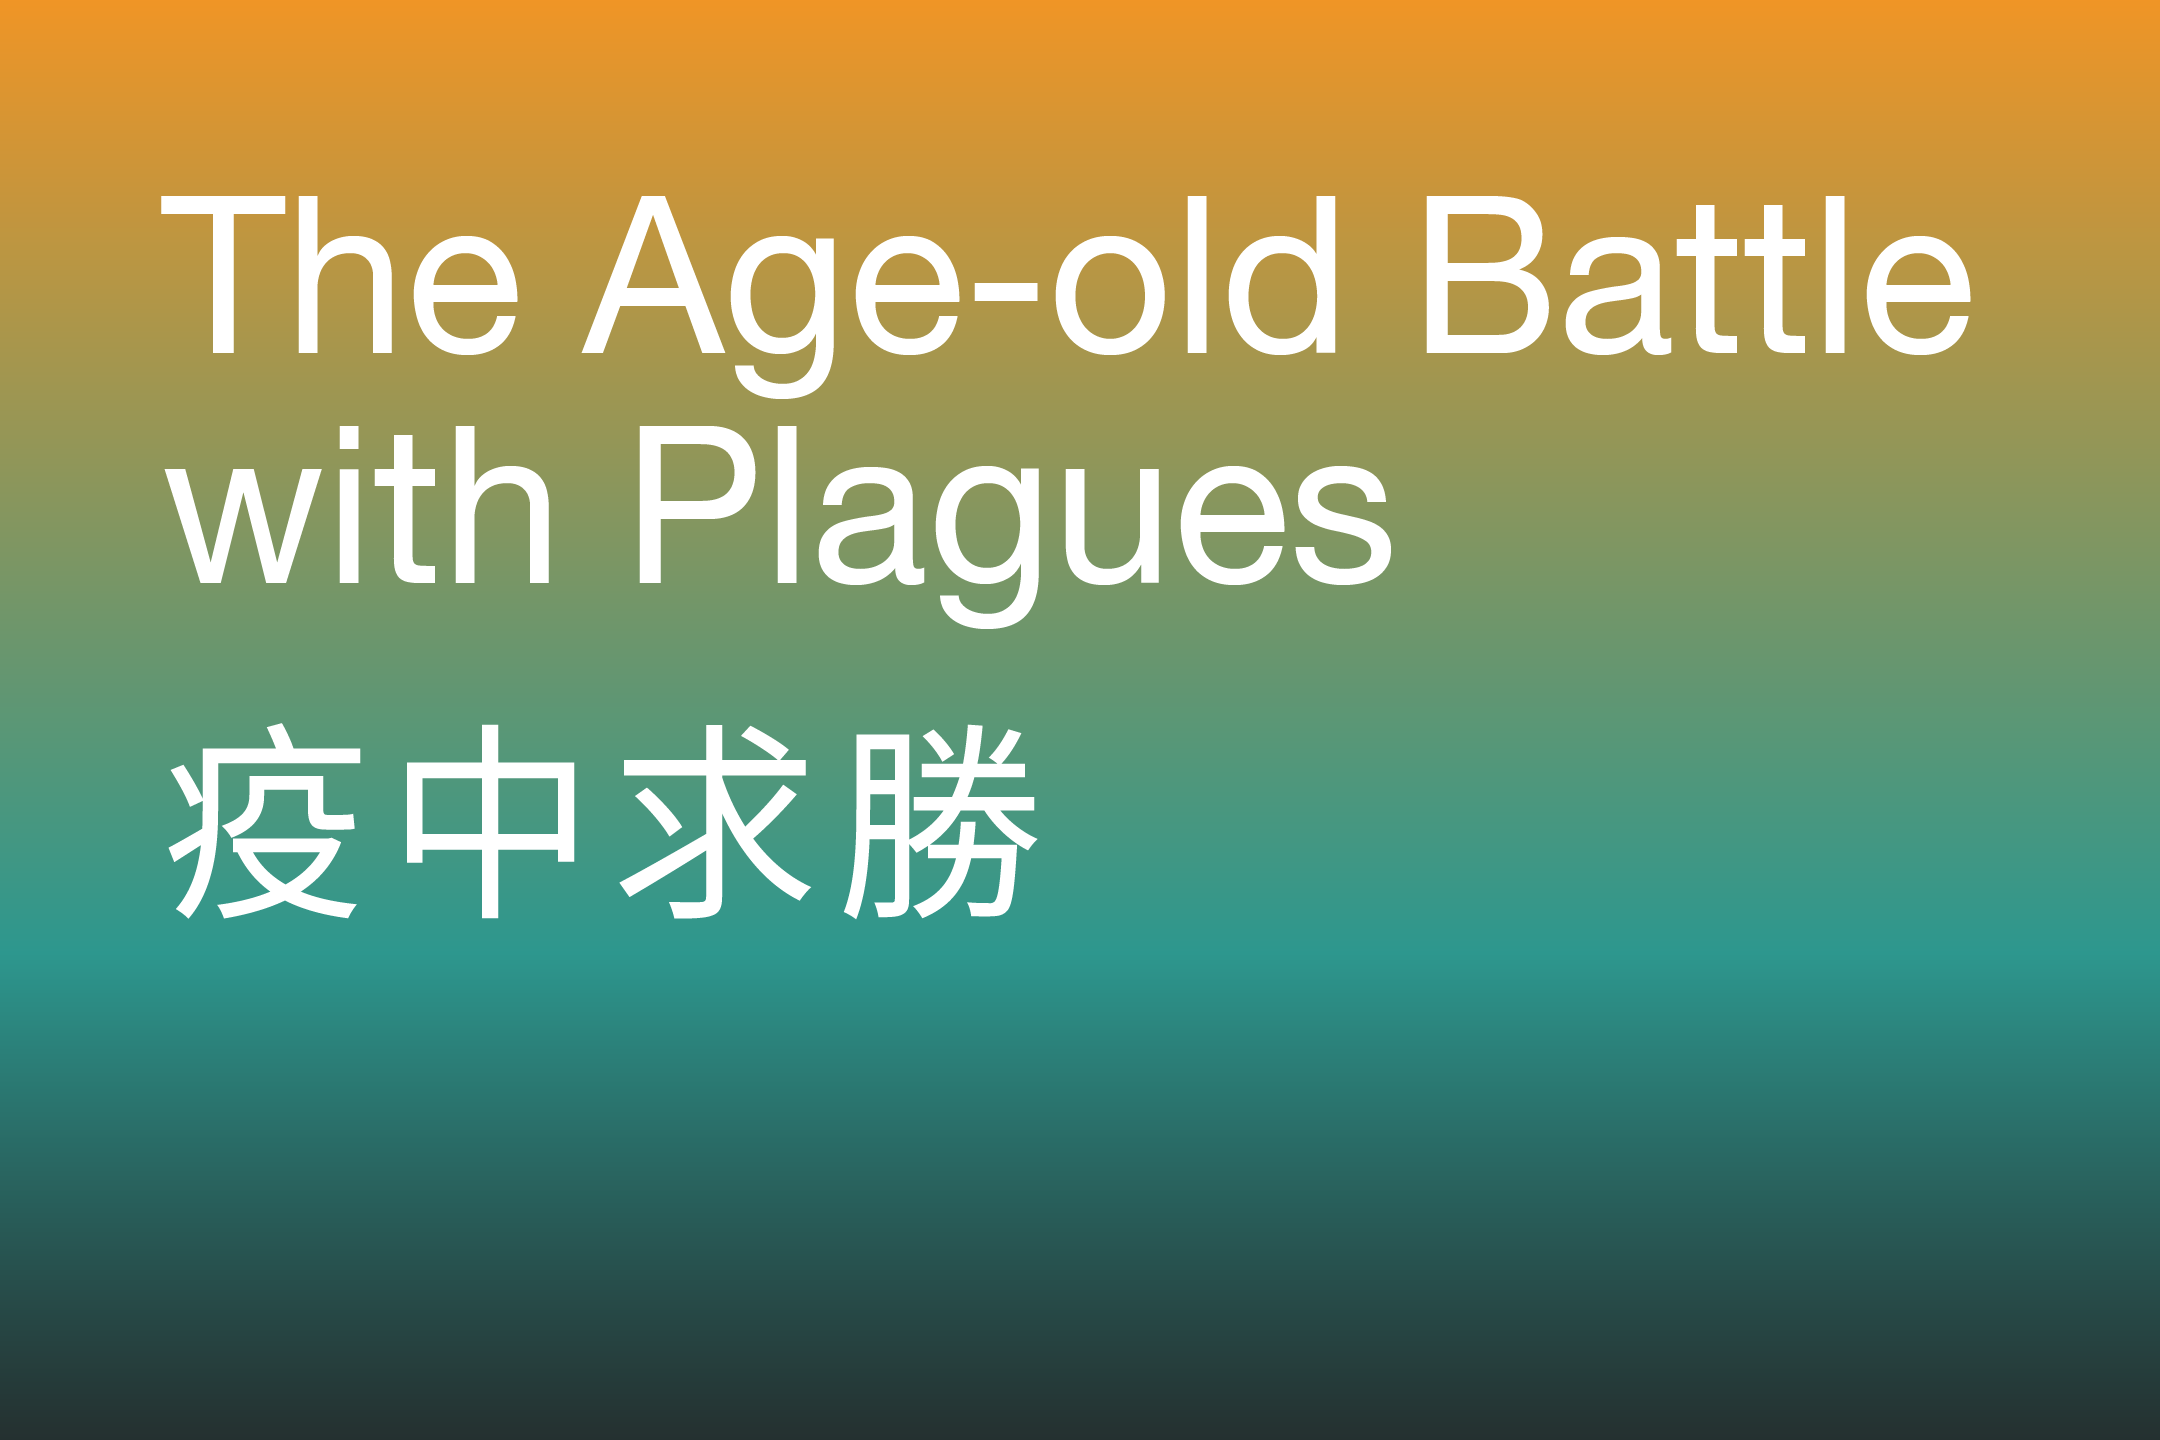 The Age-old Battle with Plagues 疫中求勝